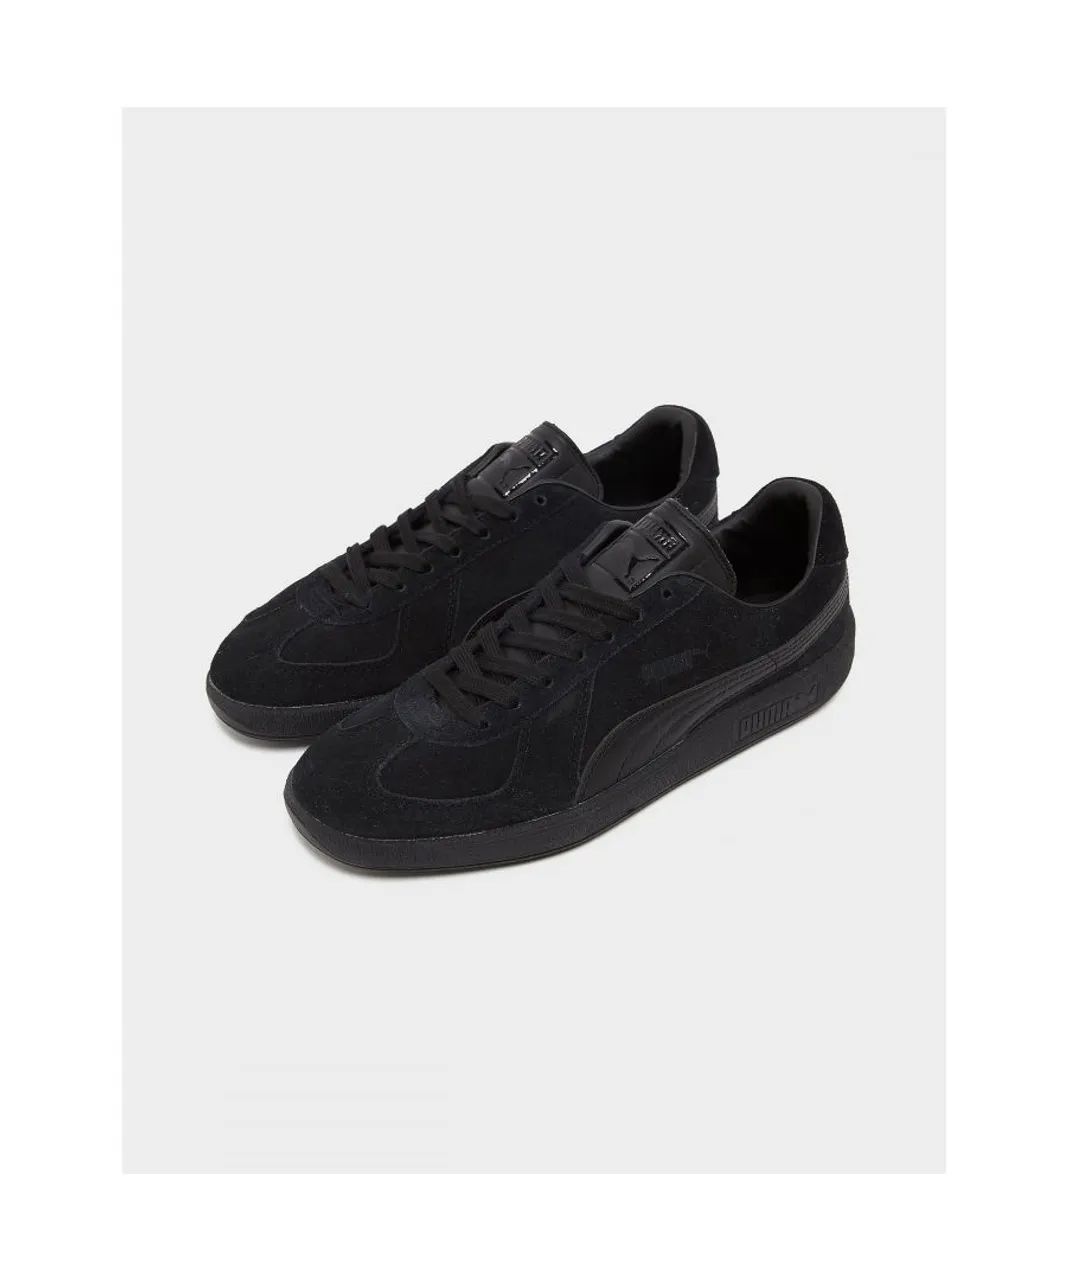 Puma Mens Unisex Army Trainer Suede Sneakers - Black Leather